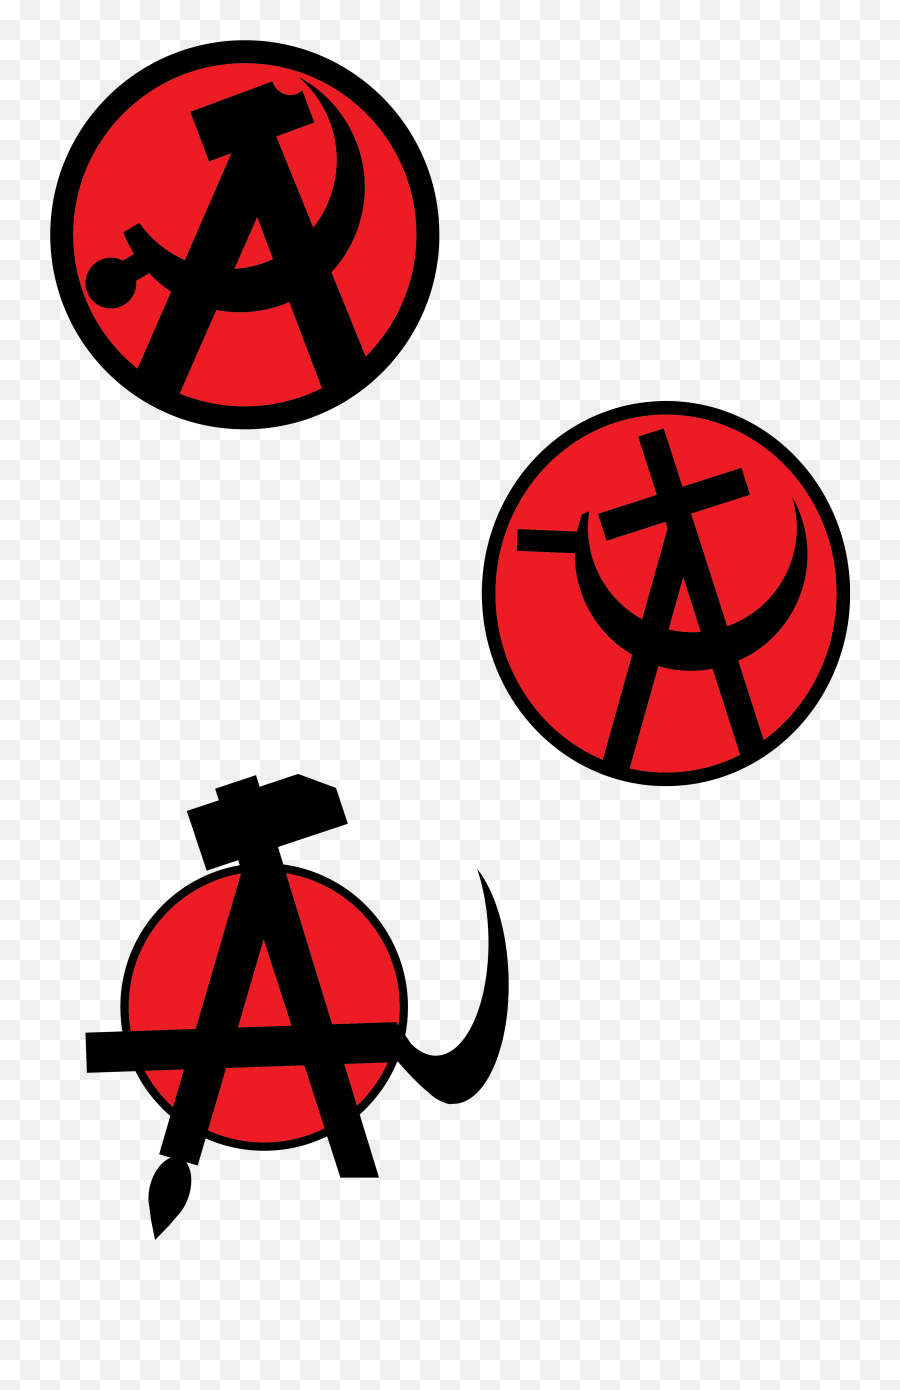 Made Some Ancom Symbols - Hammer And Sickle Variations Hammer And Sickle Variations Png,Sickle And Hammer Png